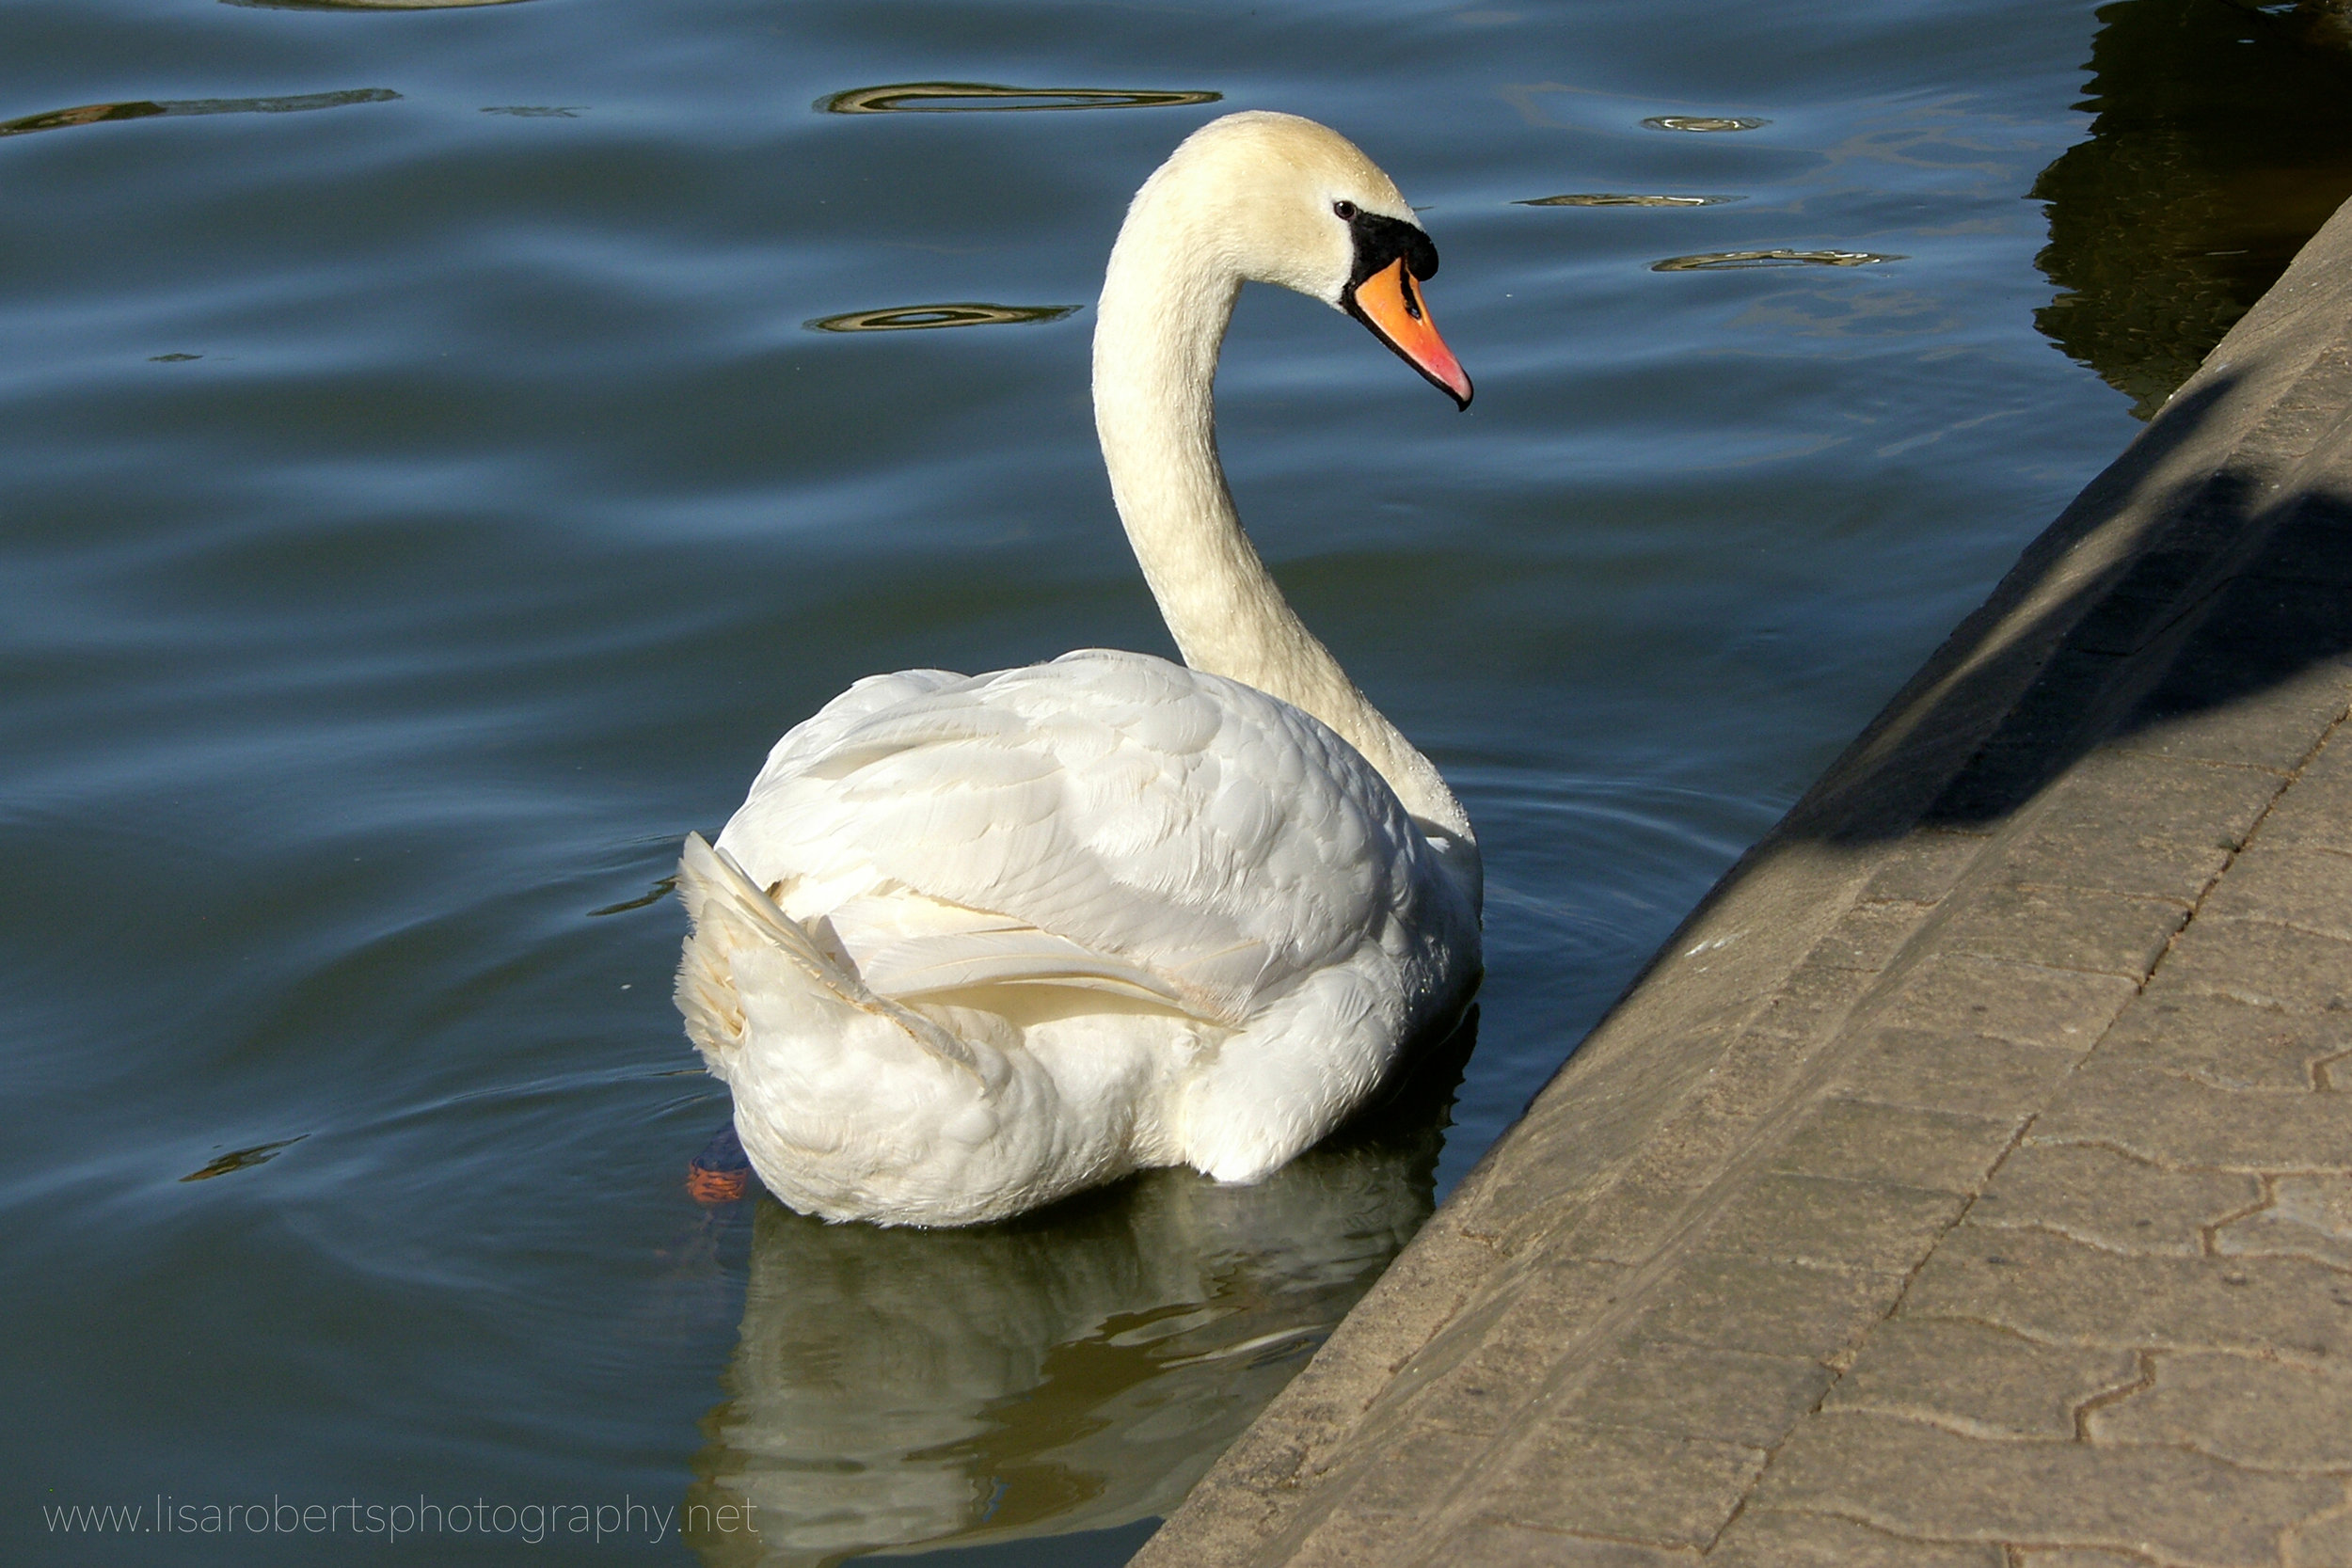  Swan on canal 